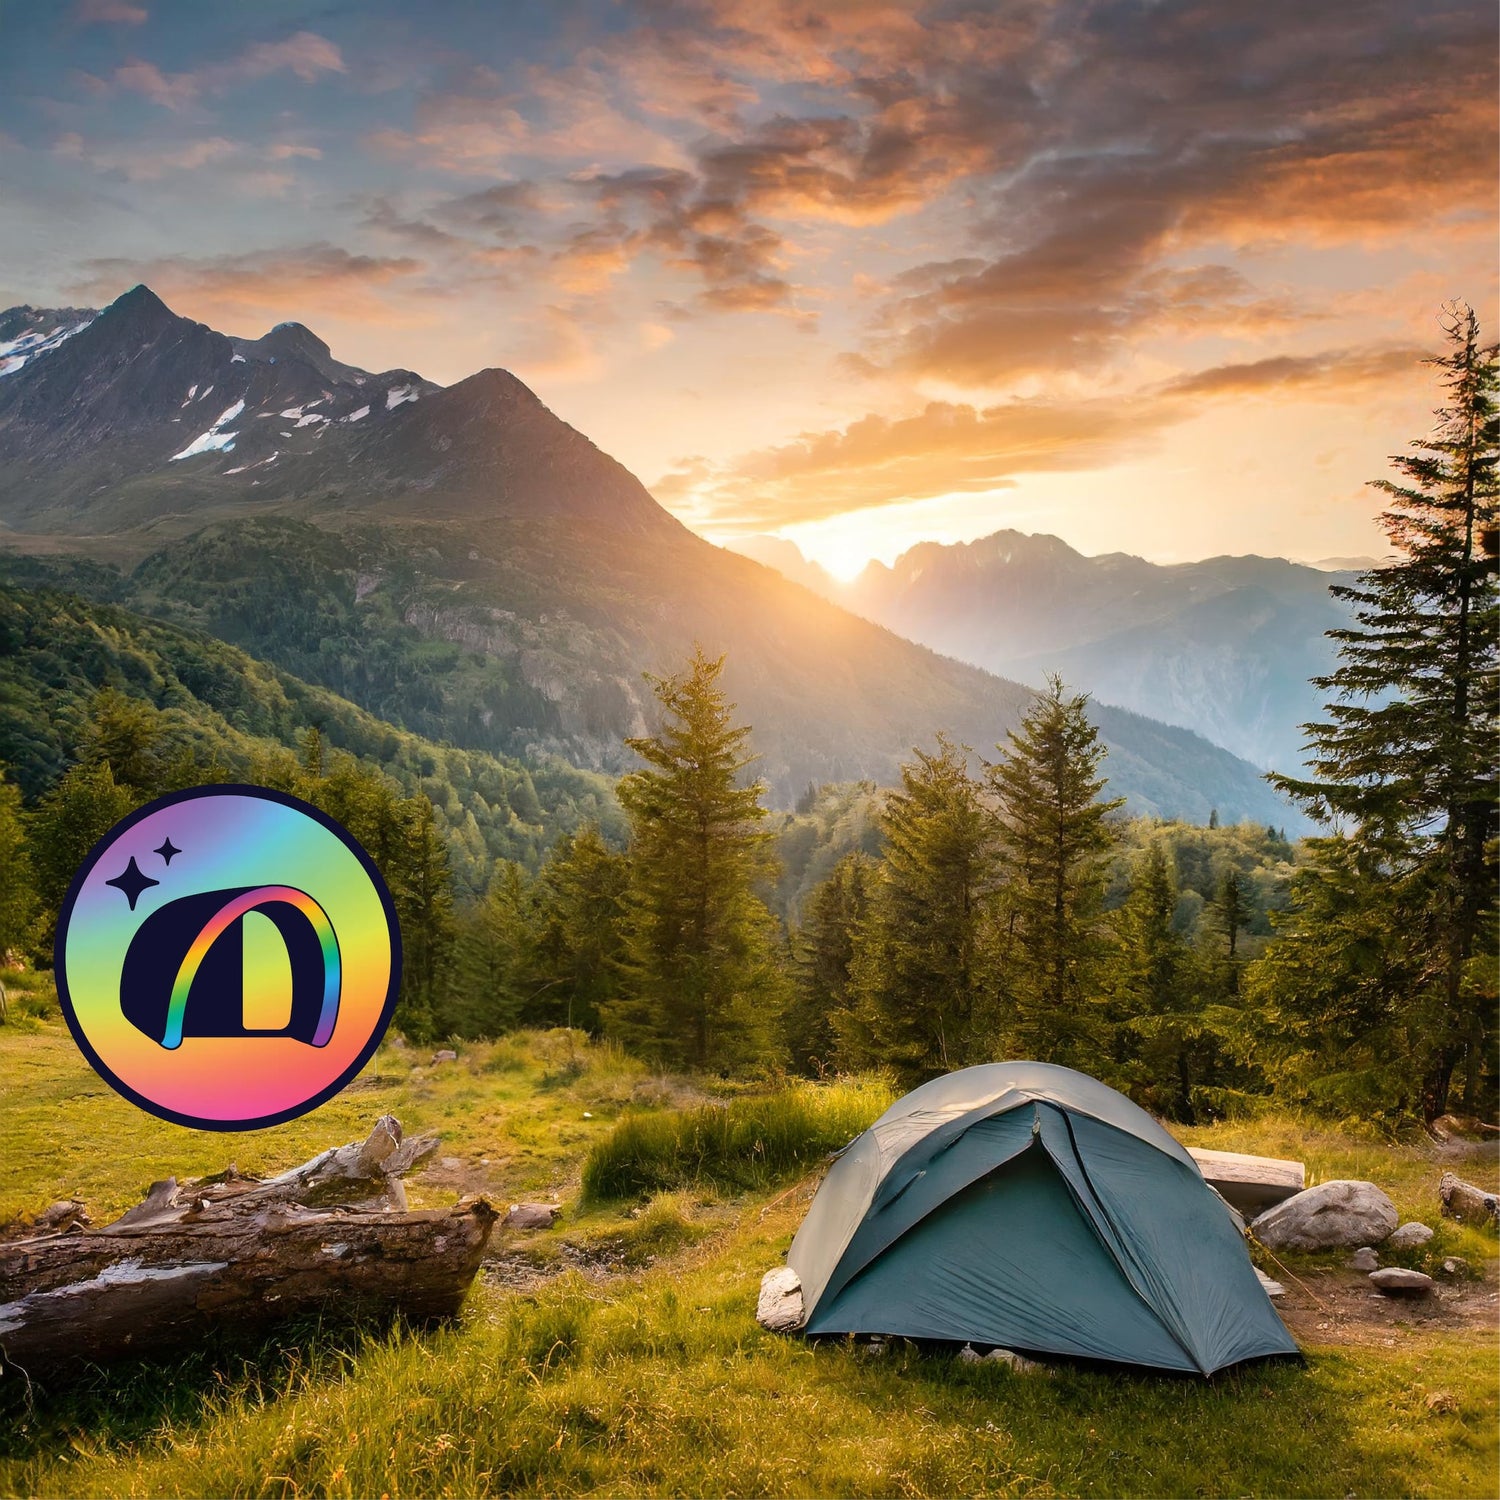 Green grass meadow in the mountains with a peak, and old style tent and the Good inTents Circle Logo